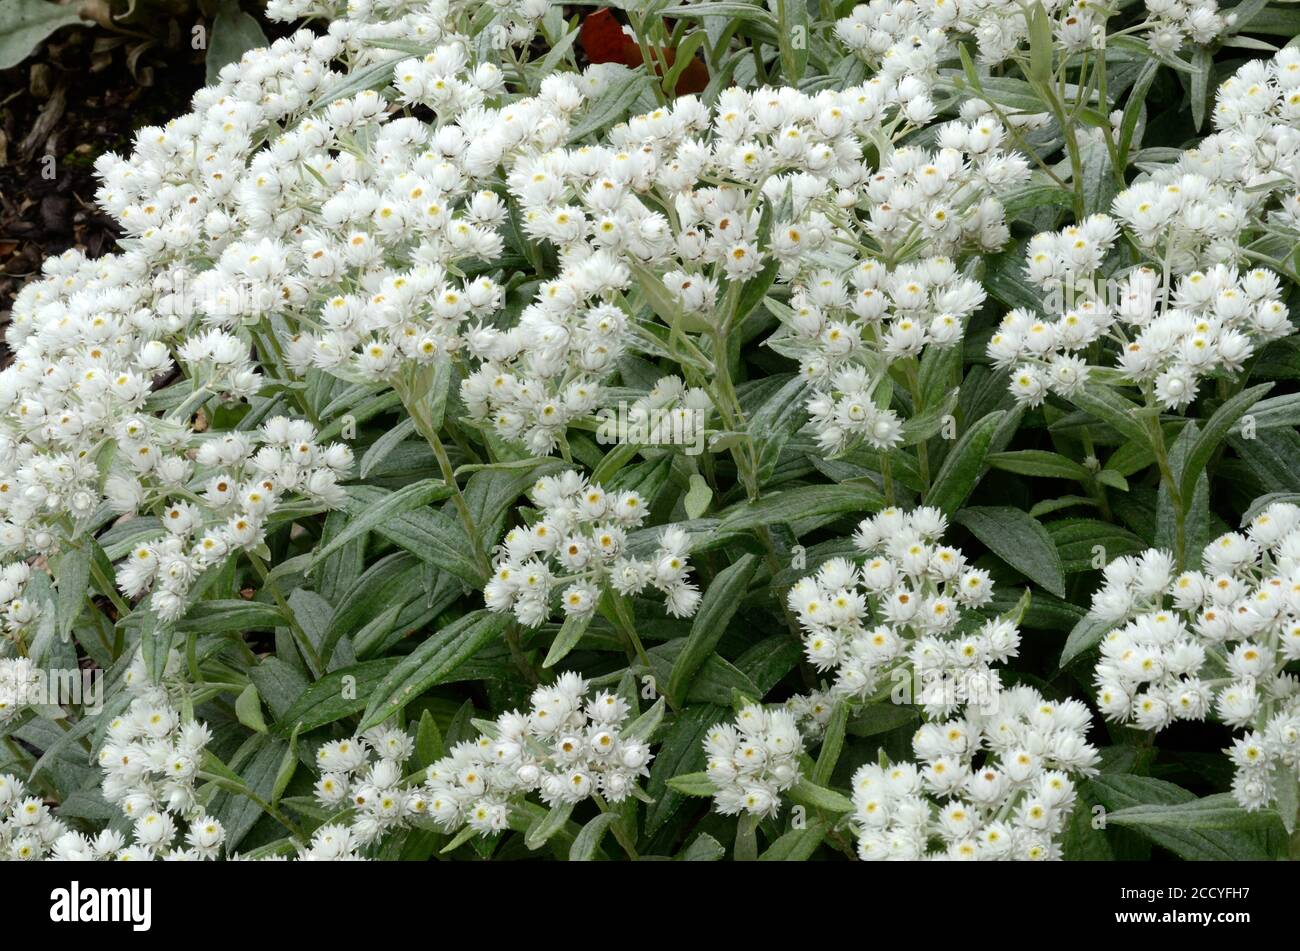 Anaphalis tripinervis Sommerschnee felt grey foliage topped with clusters of white everlasting daises daisy flowers Stock Photo